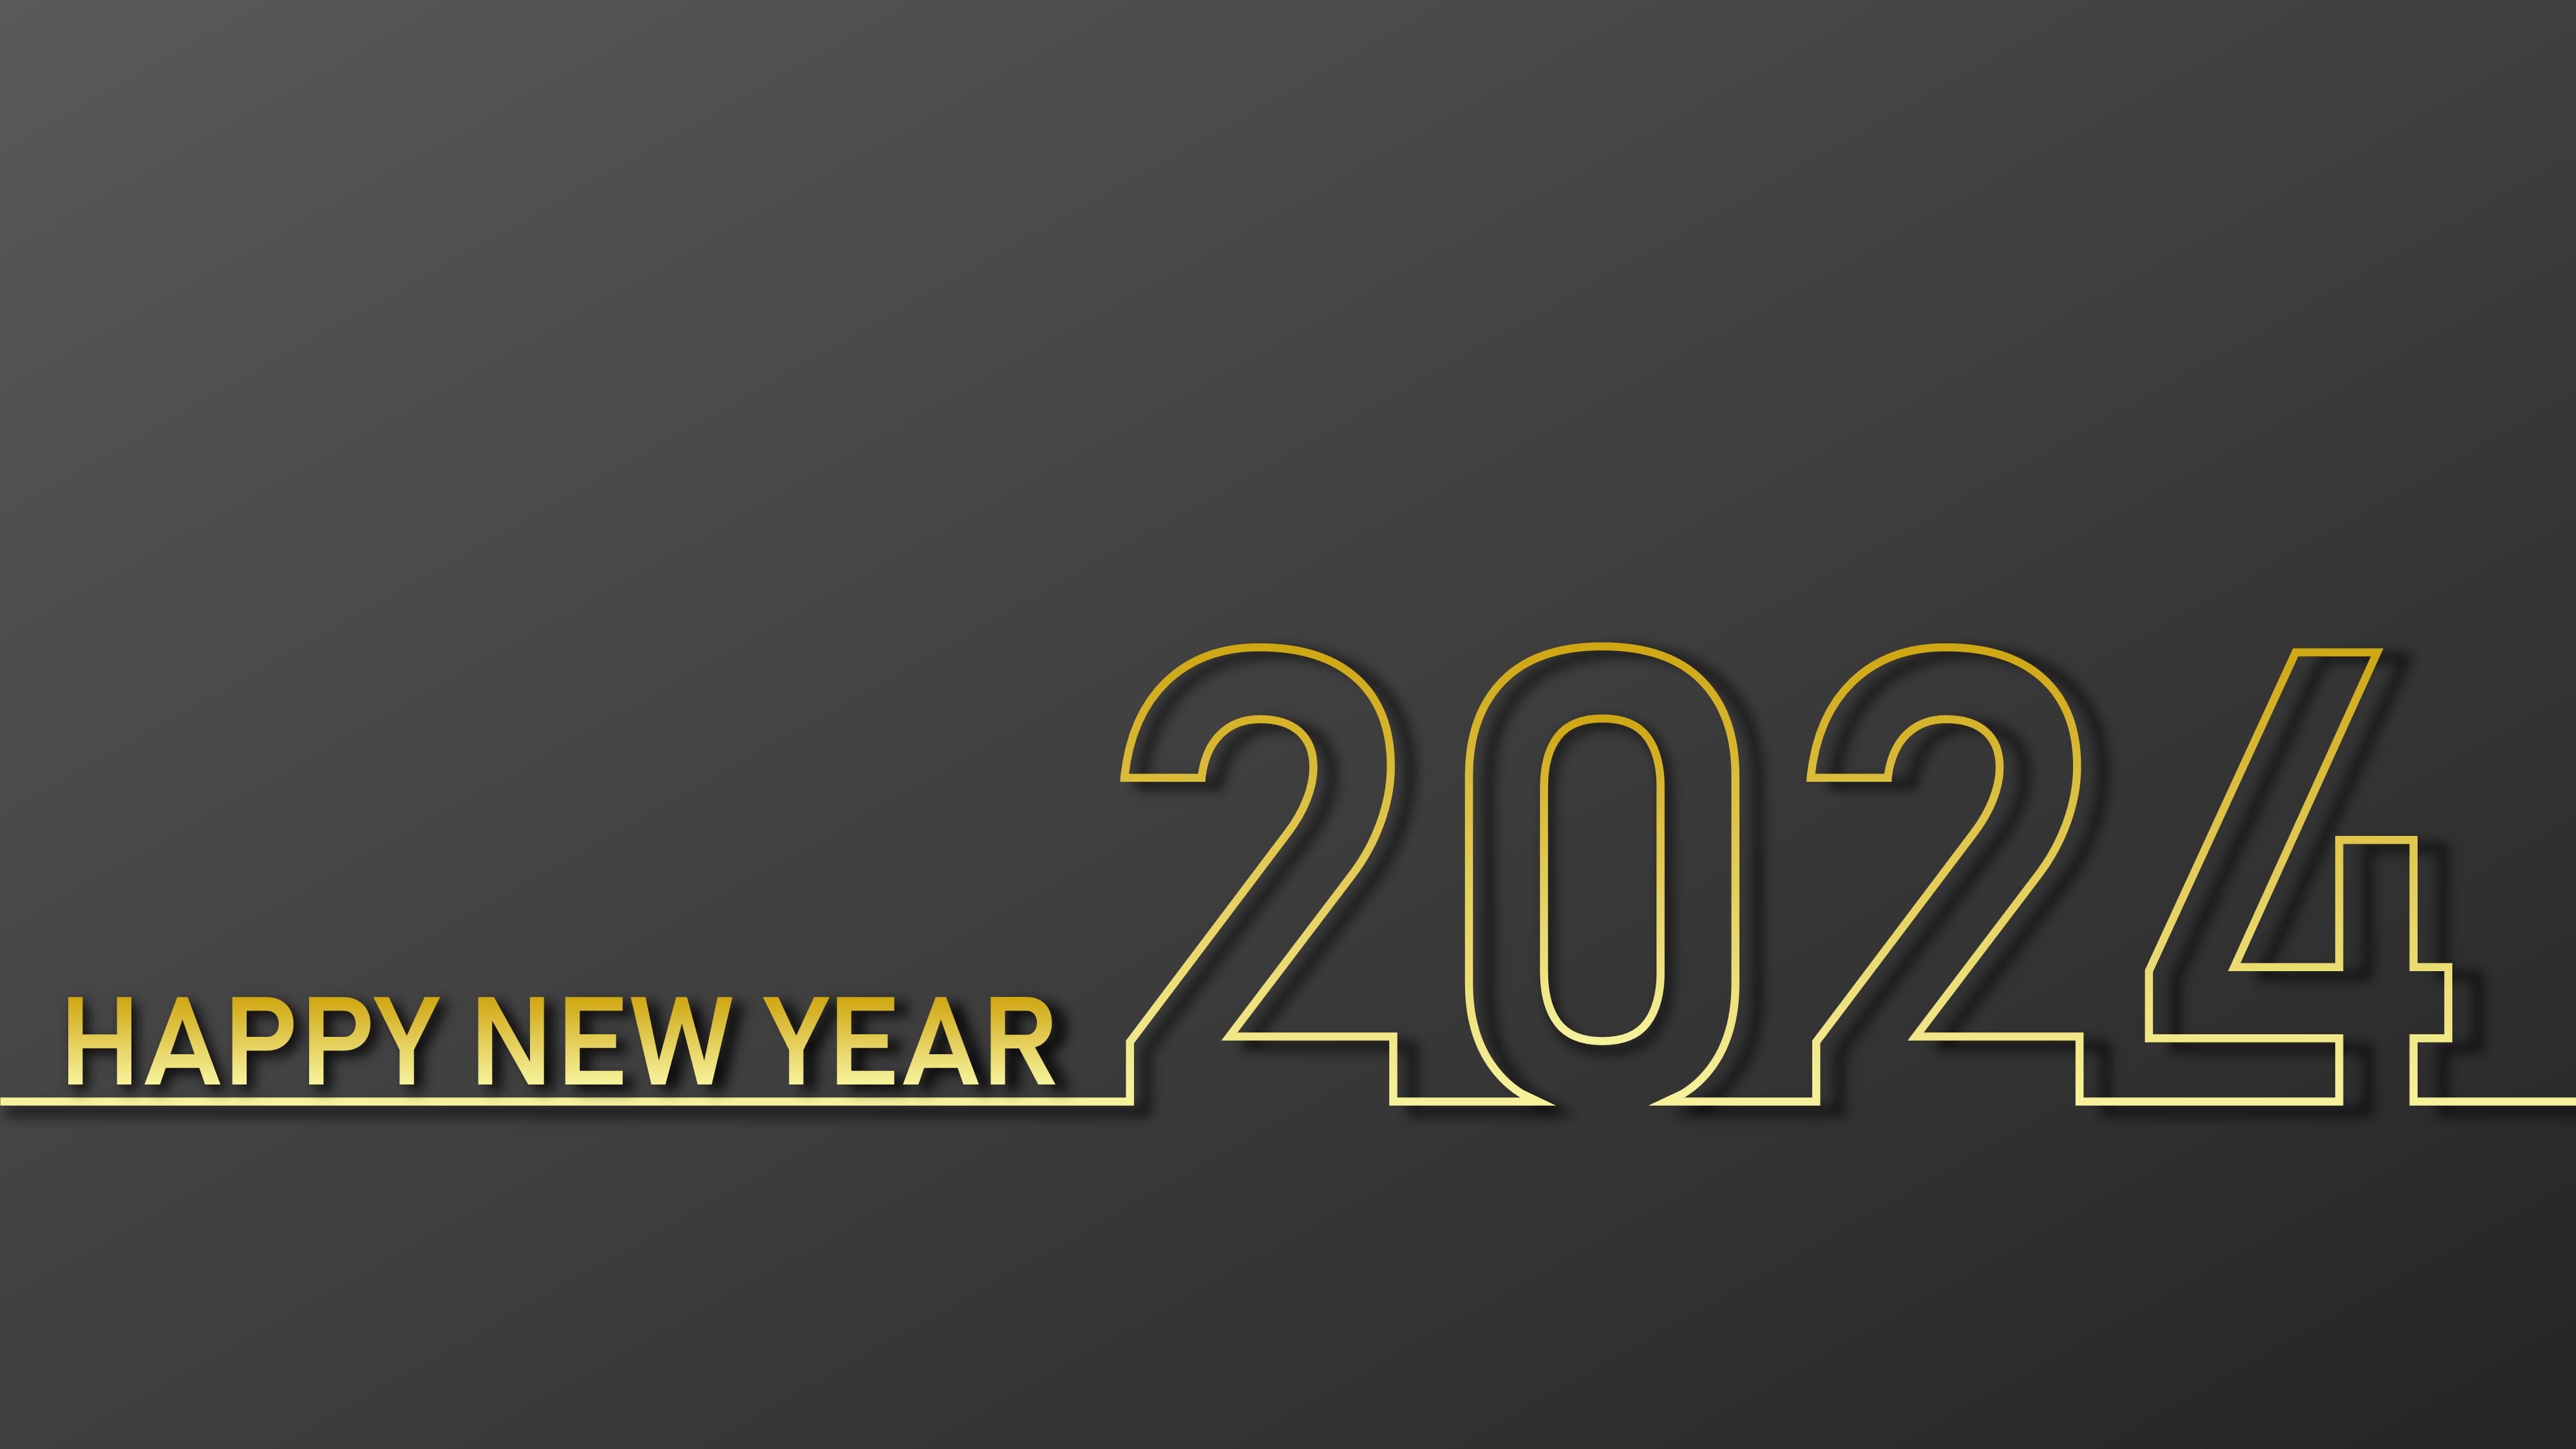 59.PowerPoint Happy New Year 2024 Template PowerUP with POWERPOINT